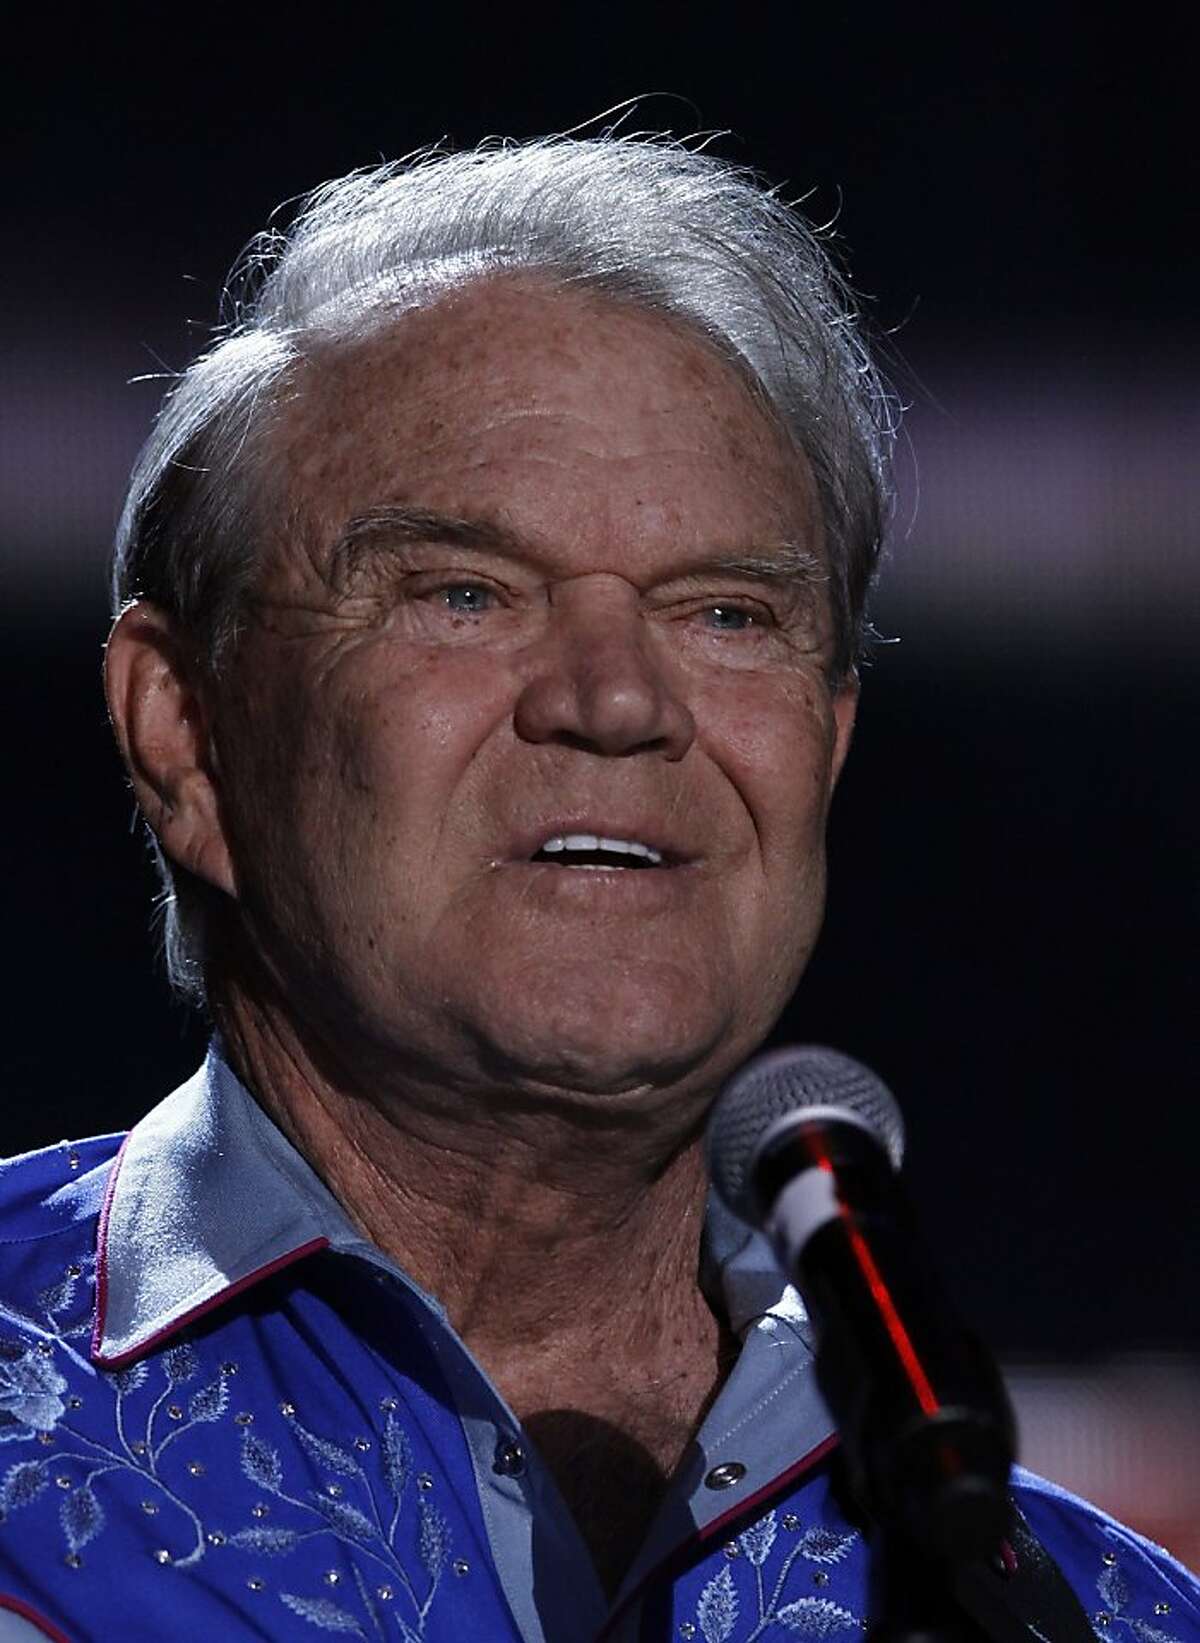 Glen Campbell, dignity intact, playing final shows